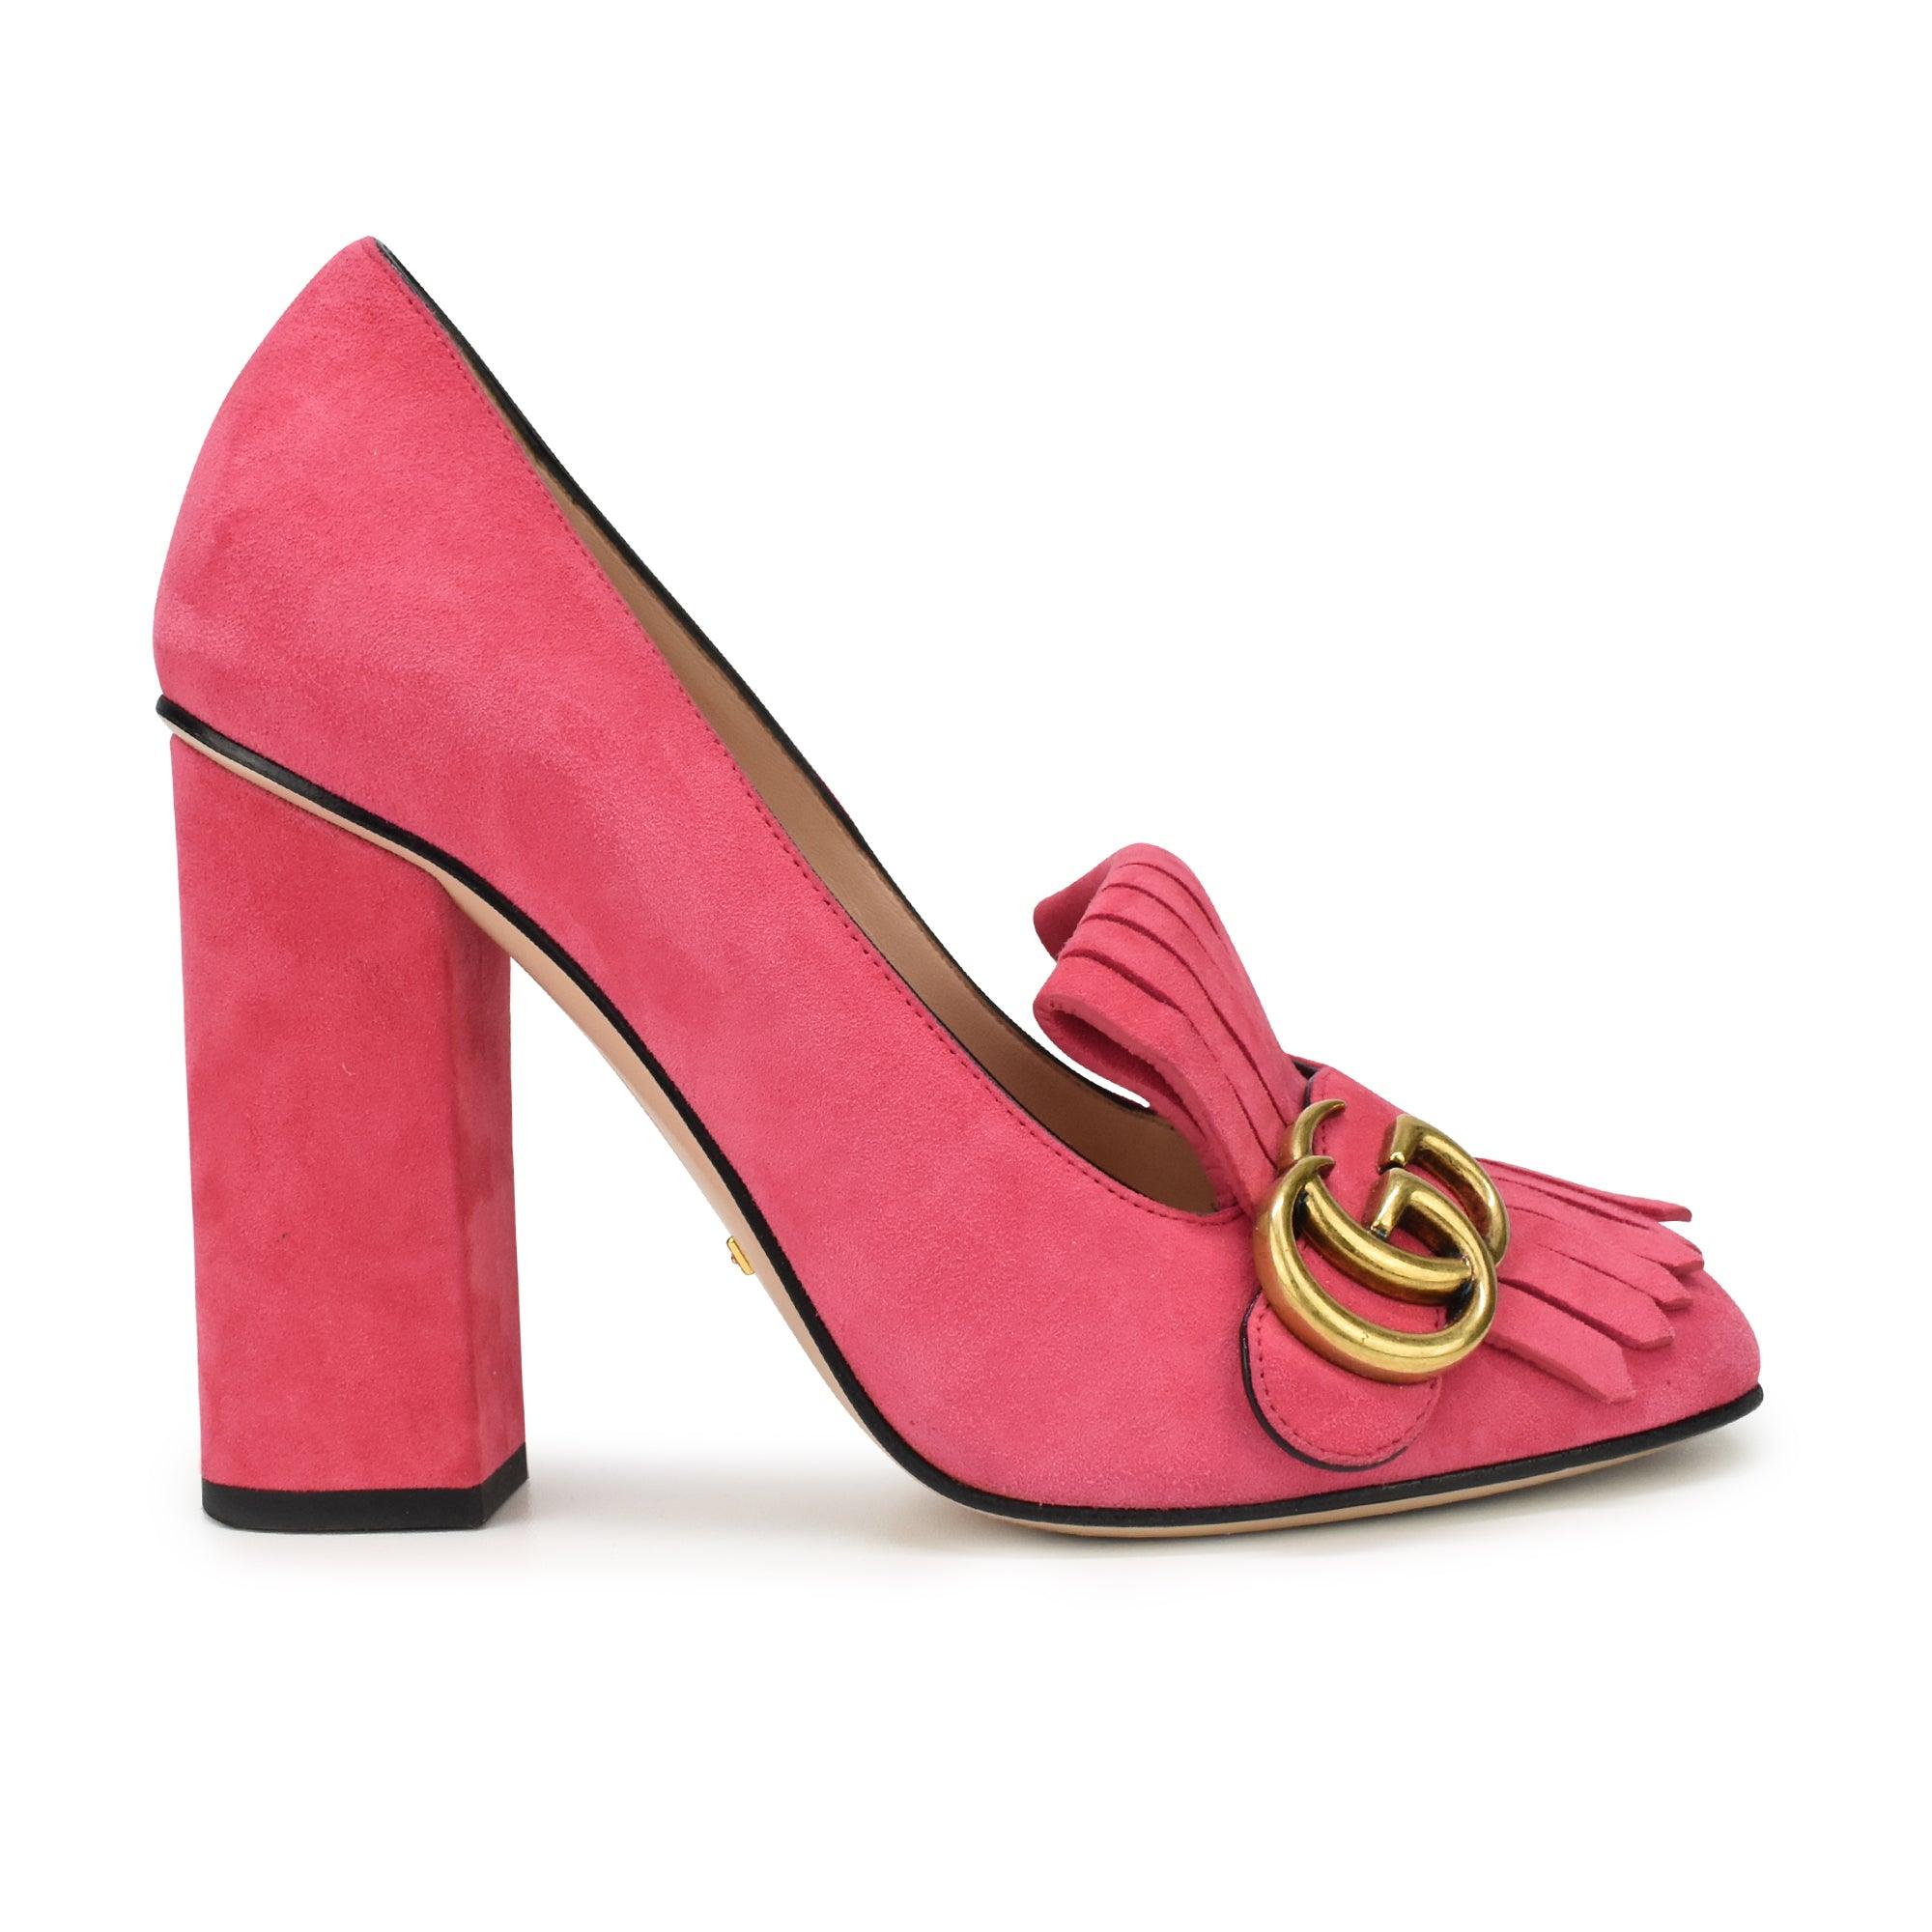 Gucci Heels - Women's 37.5 - Fashionably Yours